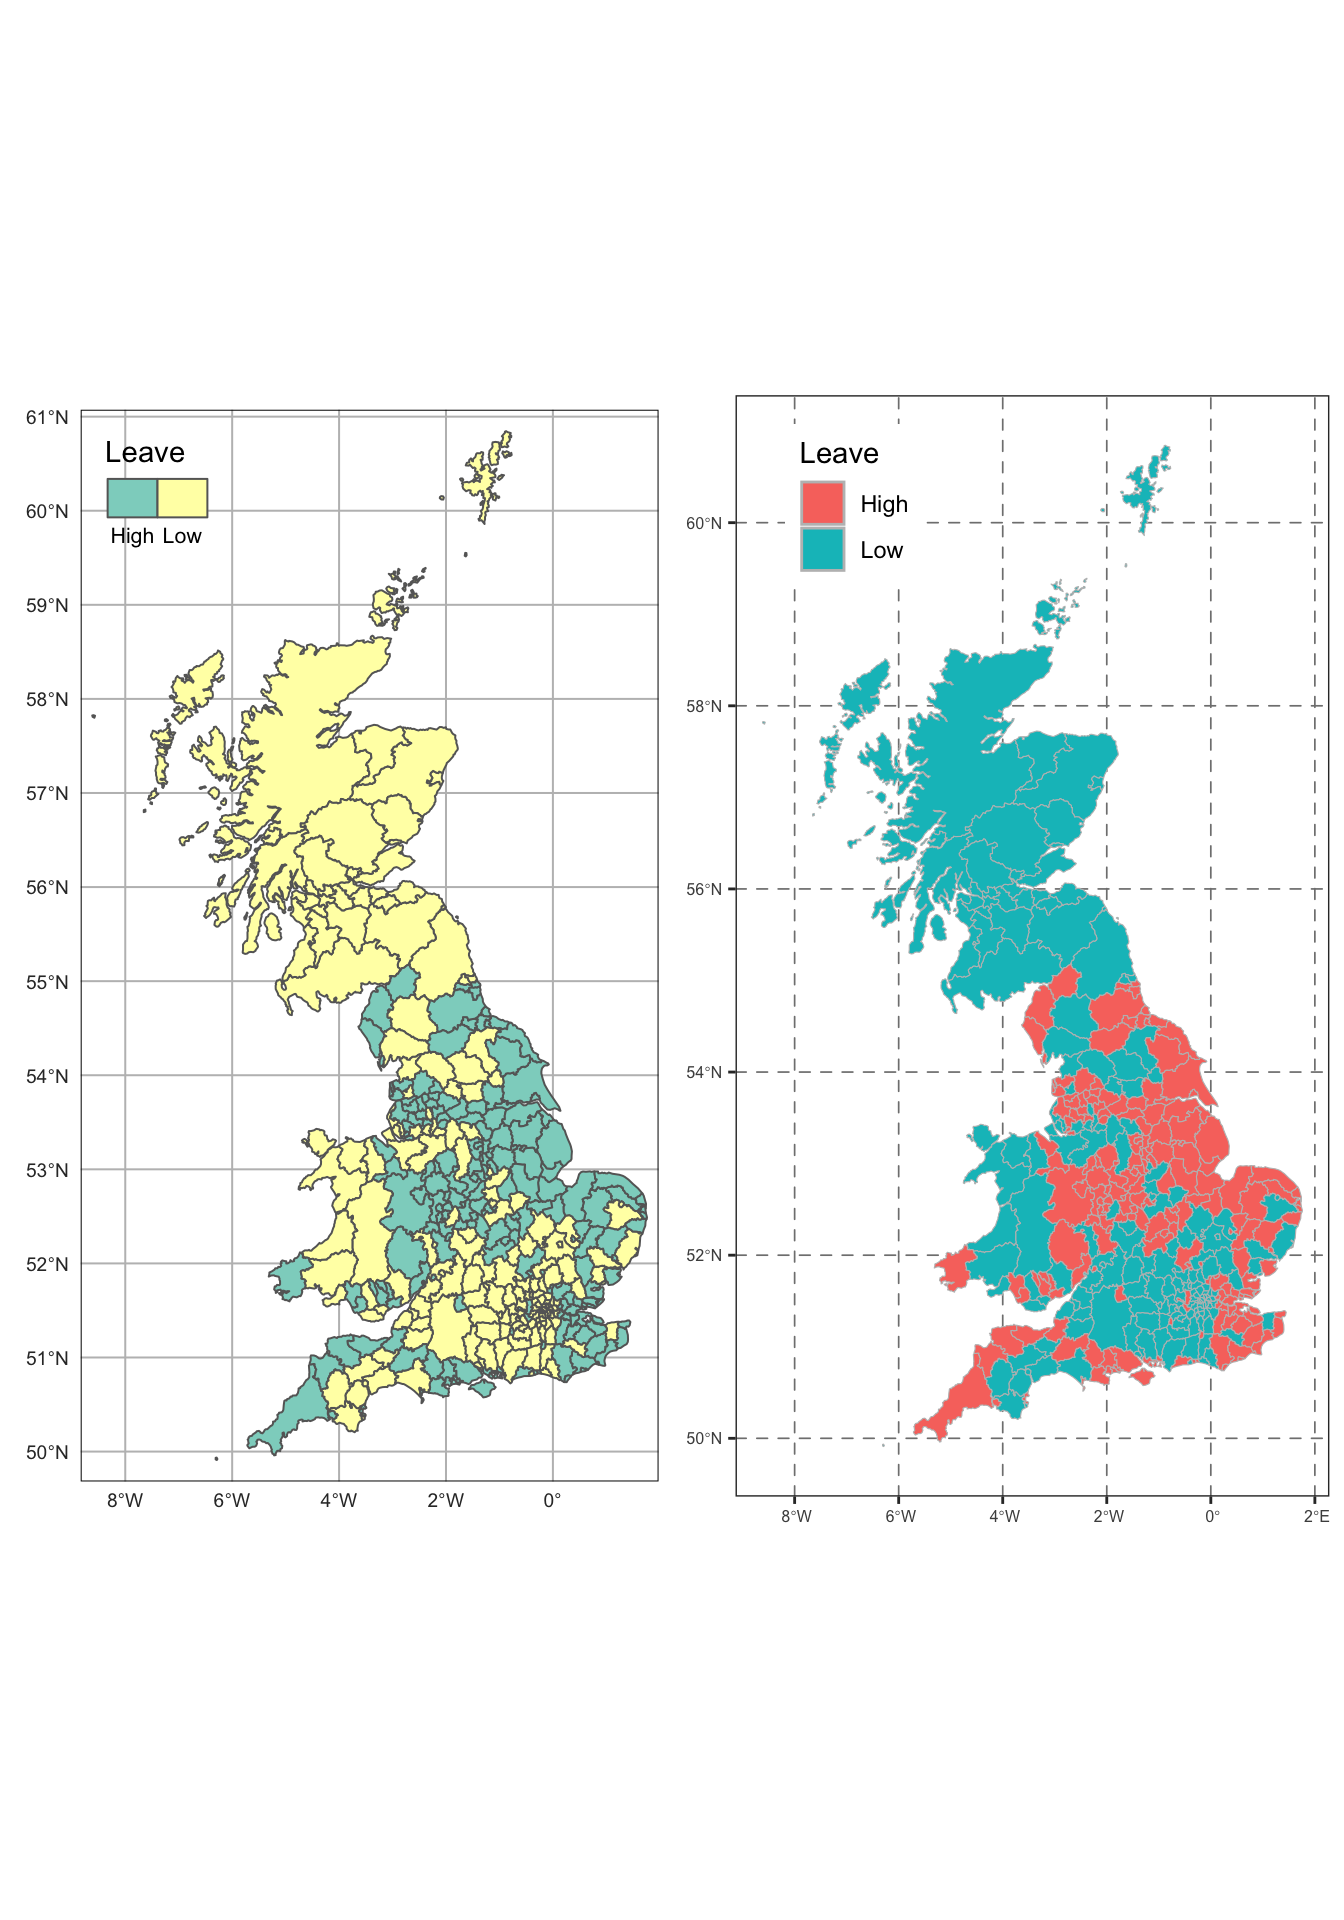 LADs with High and Low areas of leave voting using both tmap (top) and ggplot (bottom) approaches.